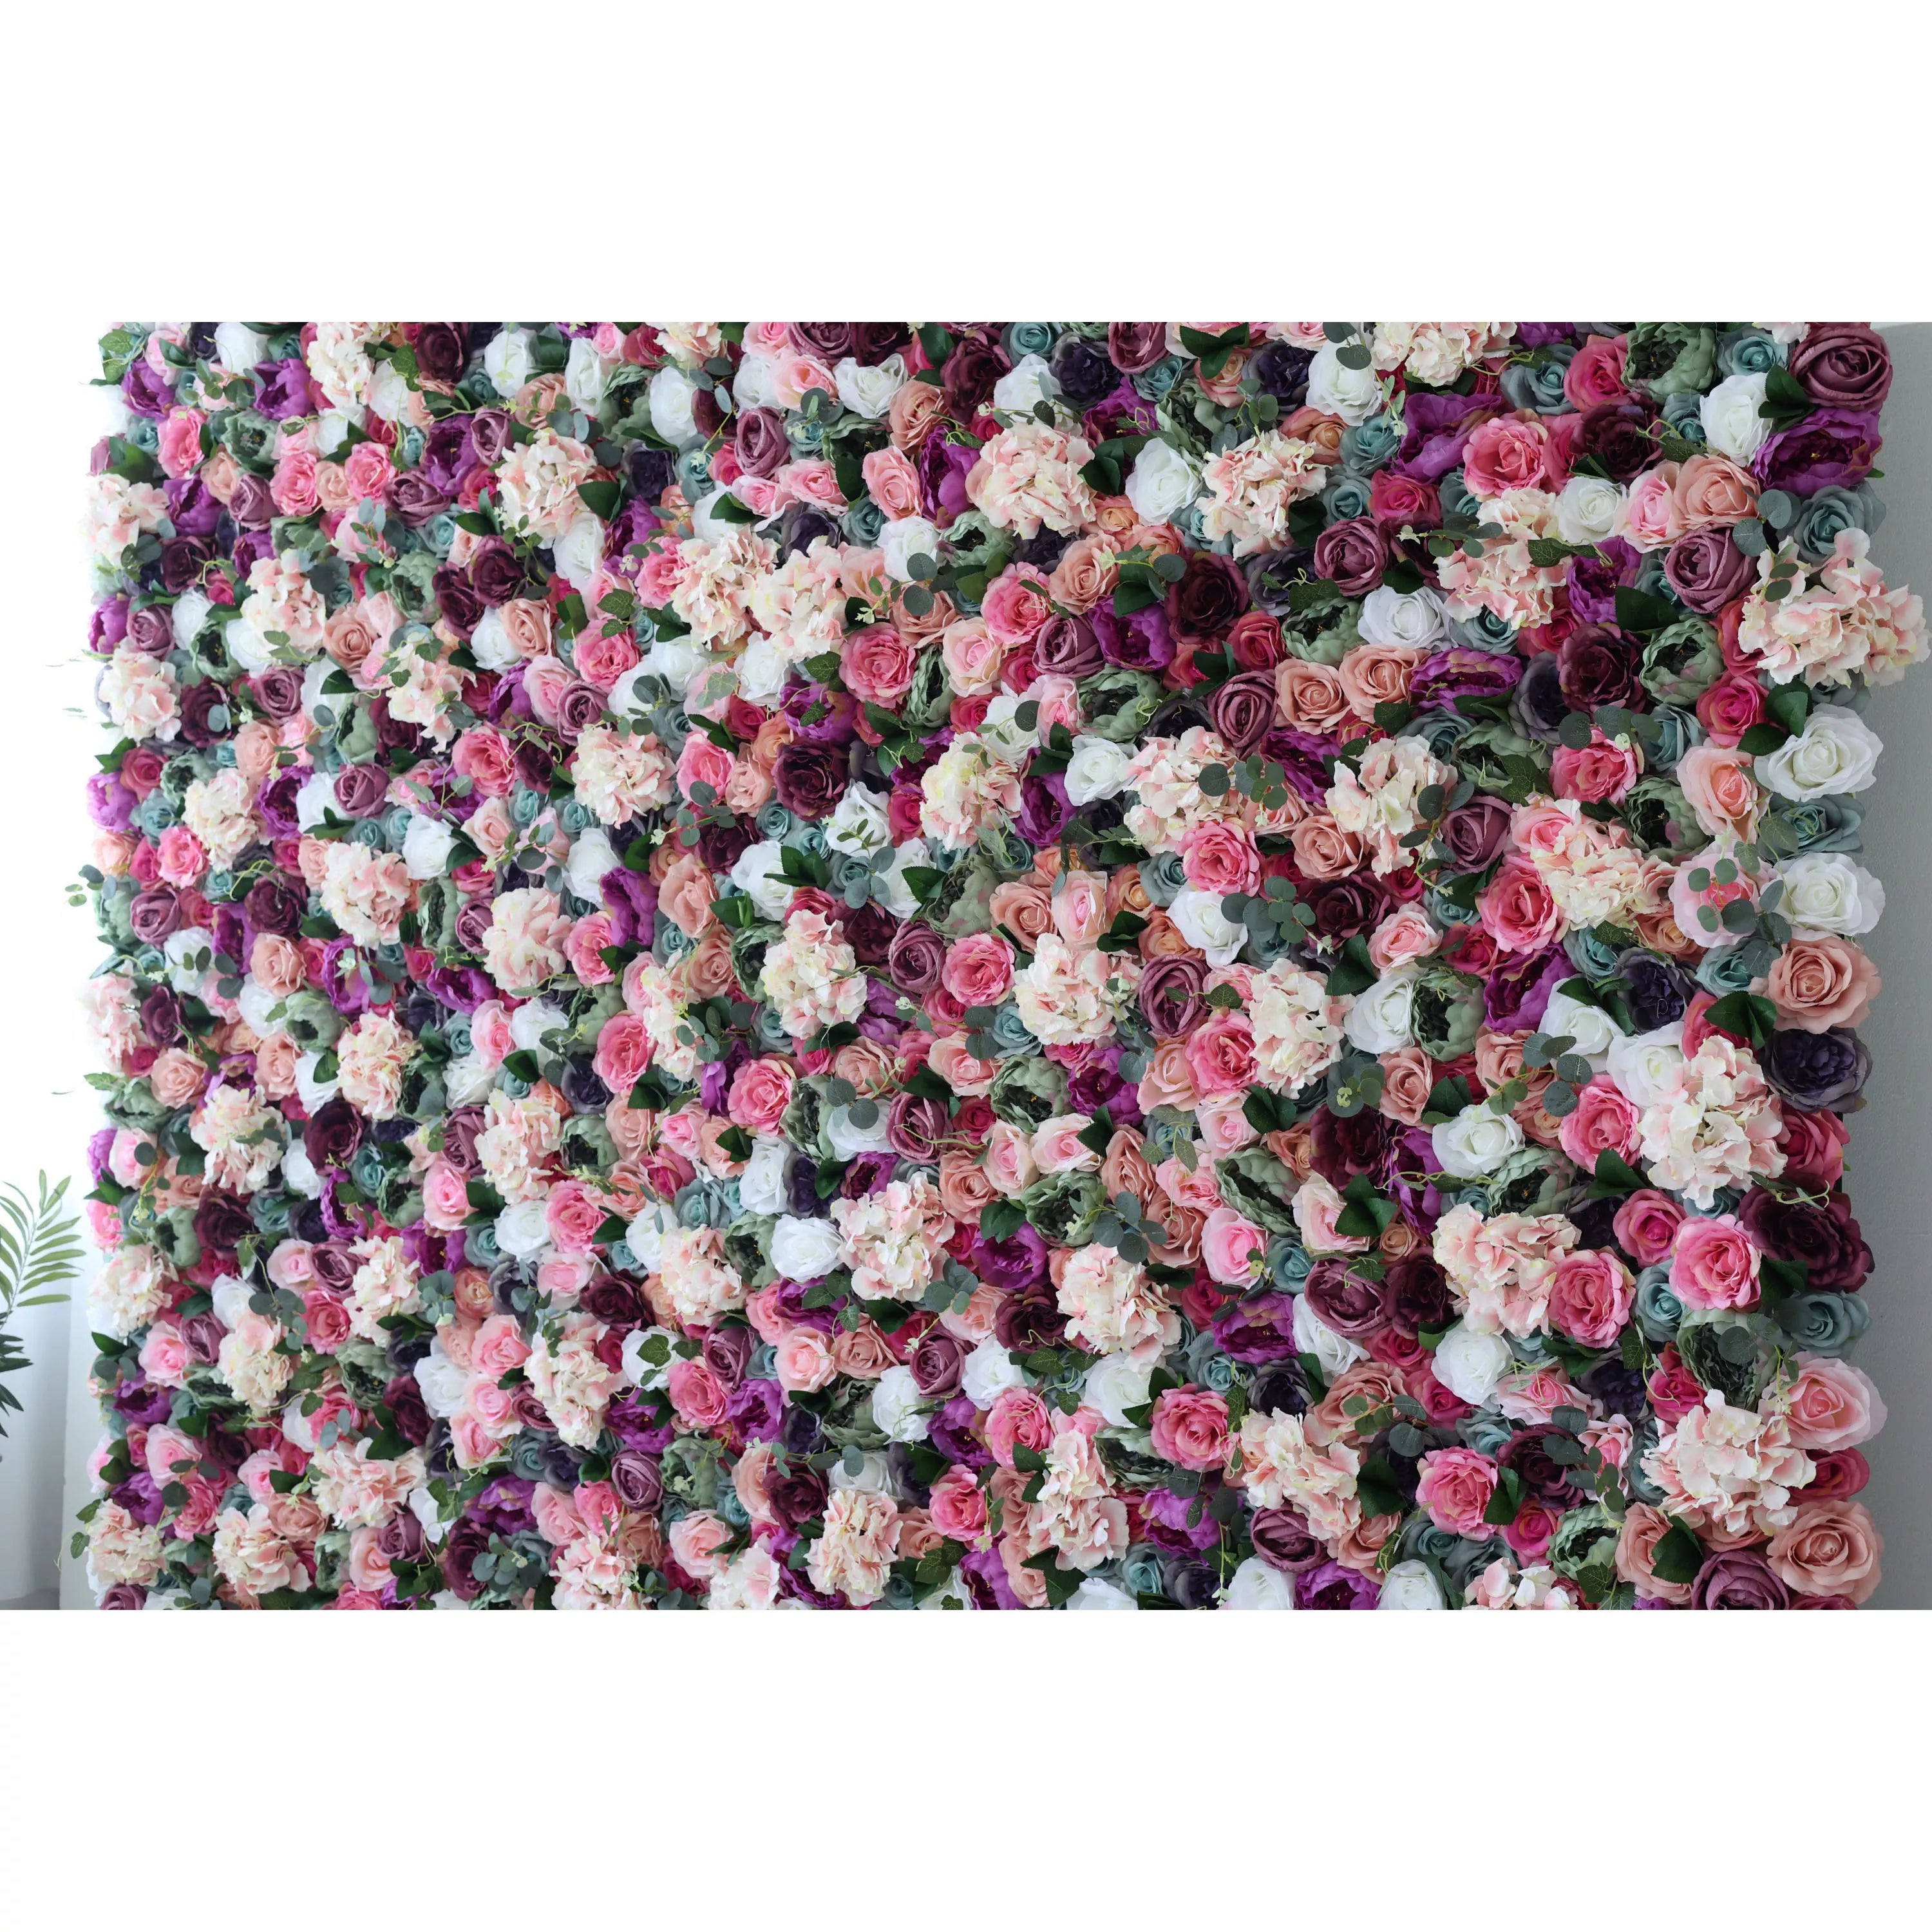 Valar Flowers artificial mixed floral fabric backdrop with eggplant purple and white colors for weddings and events - VF-0802